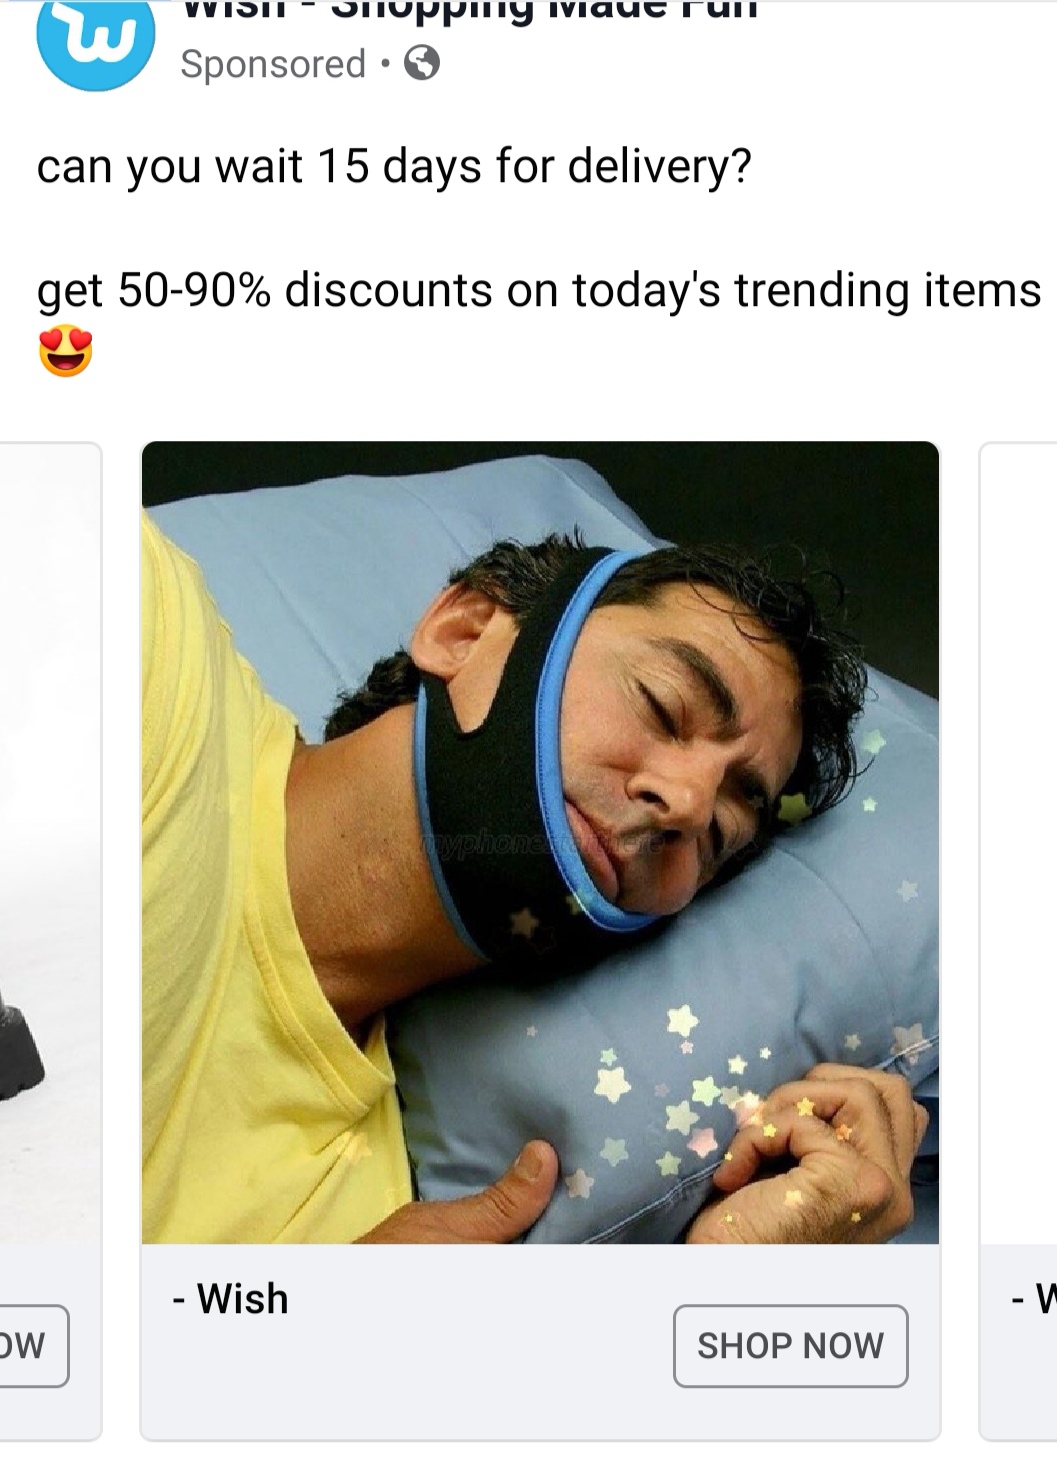 stop snoring - 9 Sponsored can you wait 15 days for delivery? get 5090% discounts on today's trending items Wish Dw Shop Now